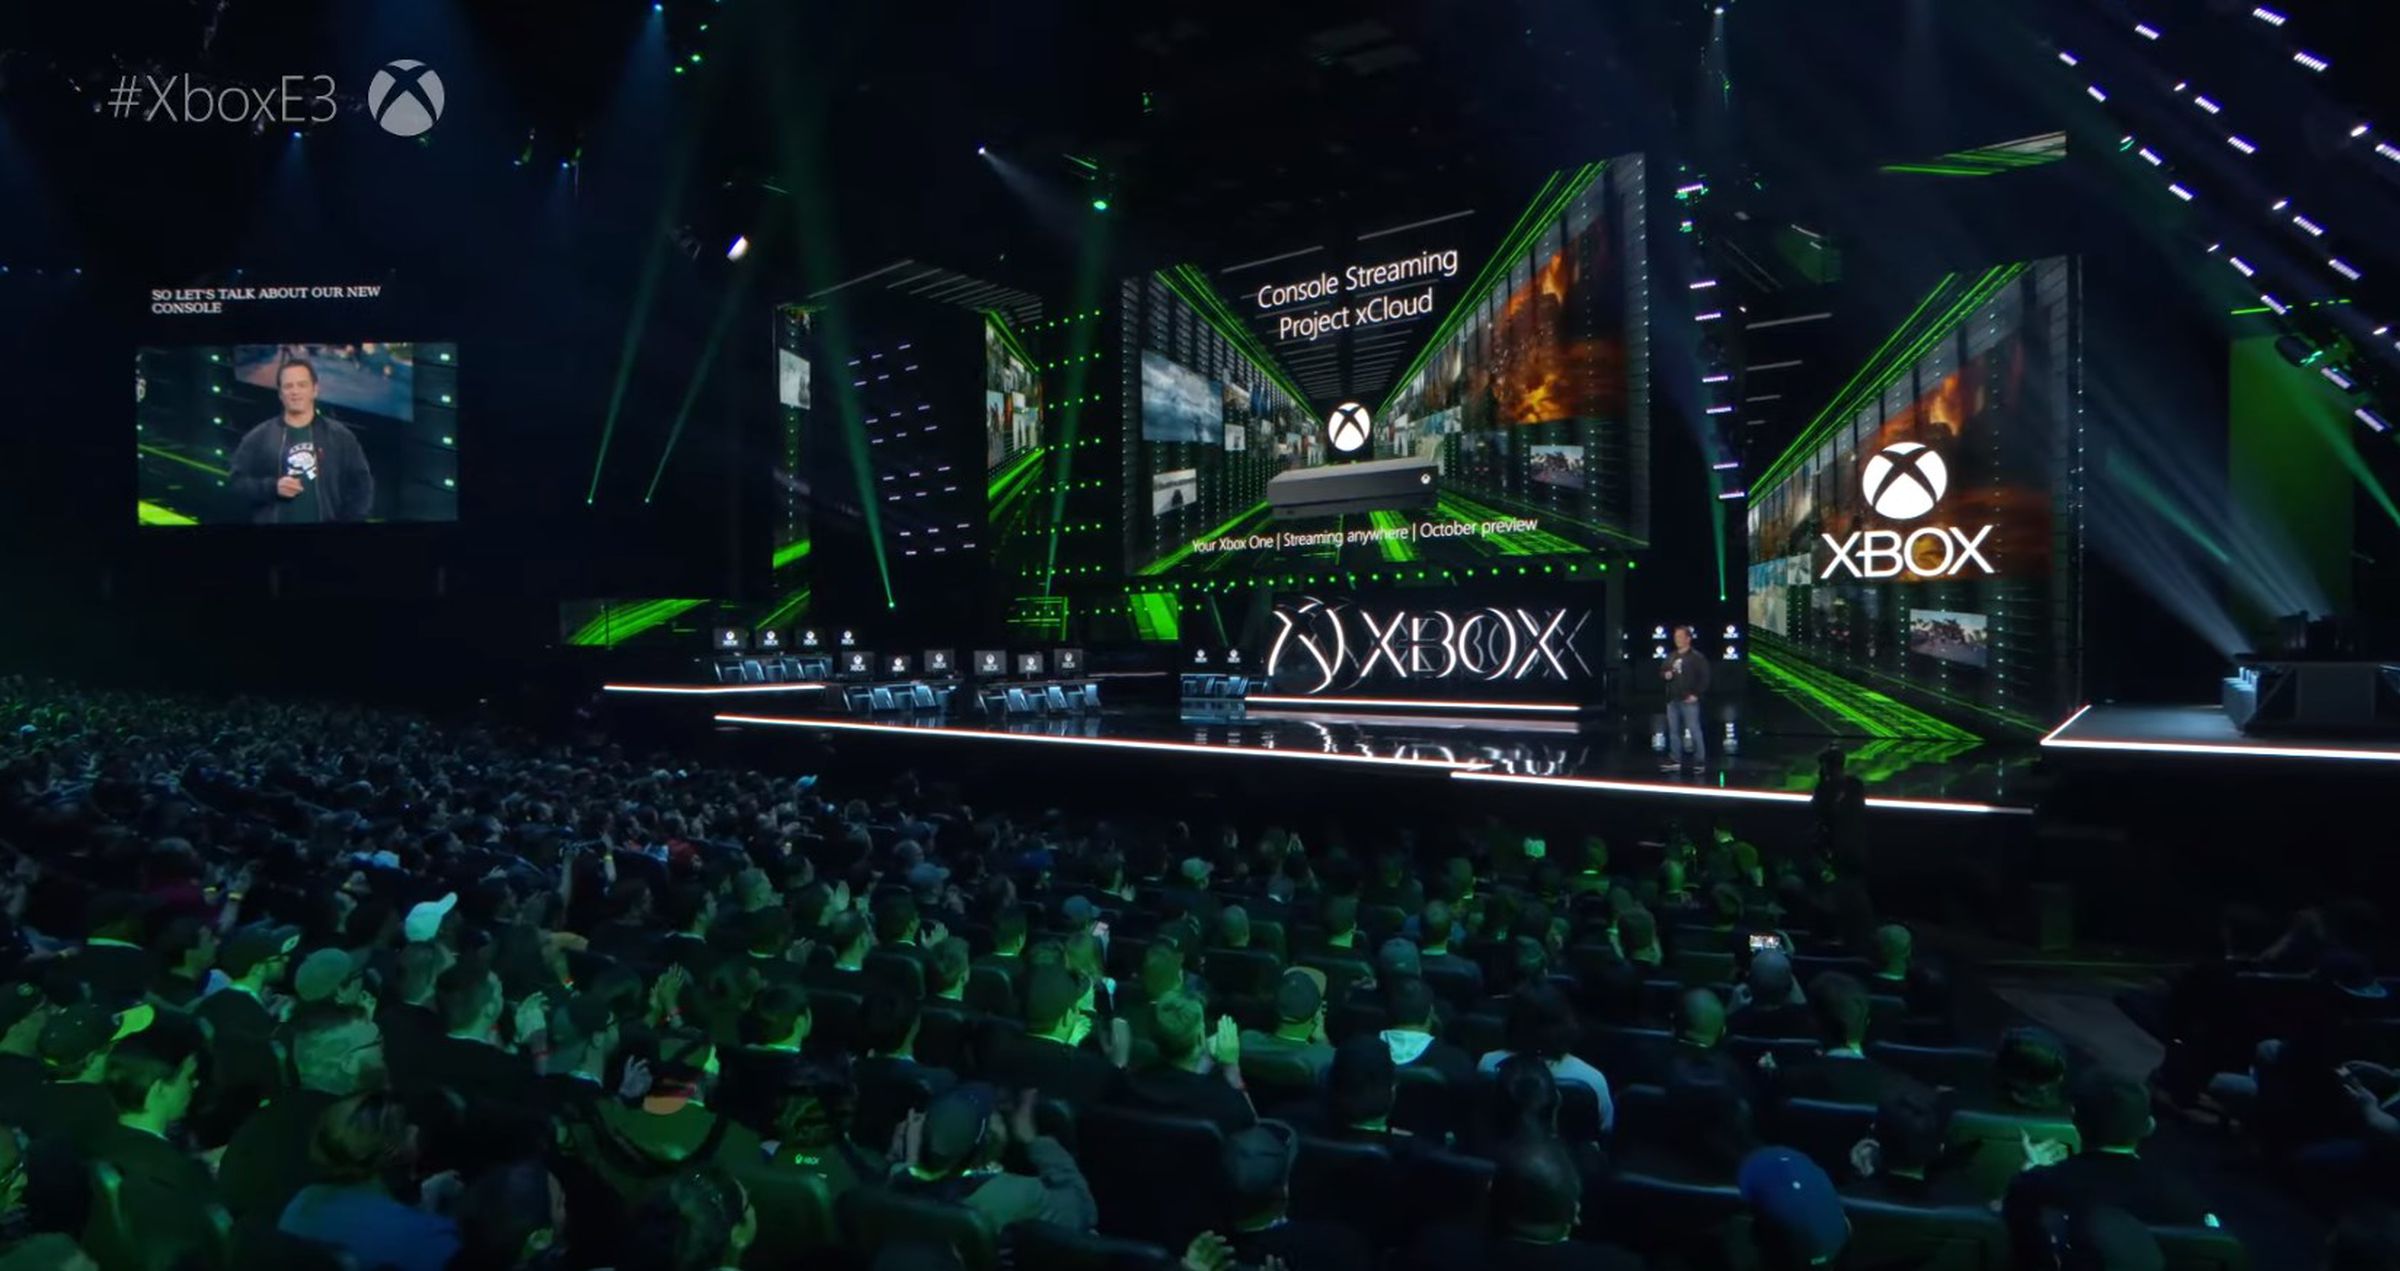 The point during Microsoft’s Xbox E3 2019 live stream the company says it announced October xCloud availability alongside the new Xbox streaming feature. 